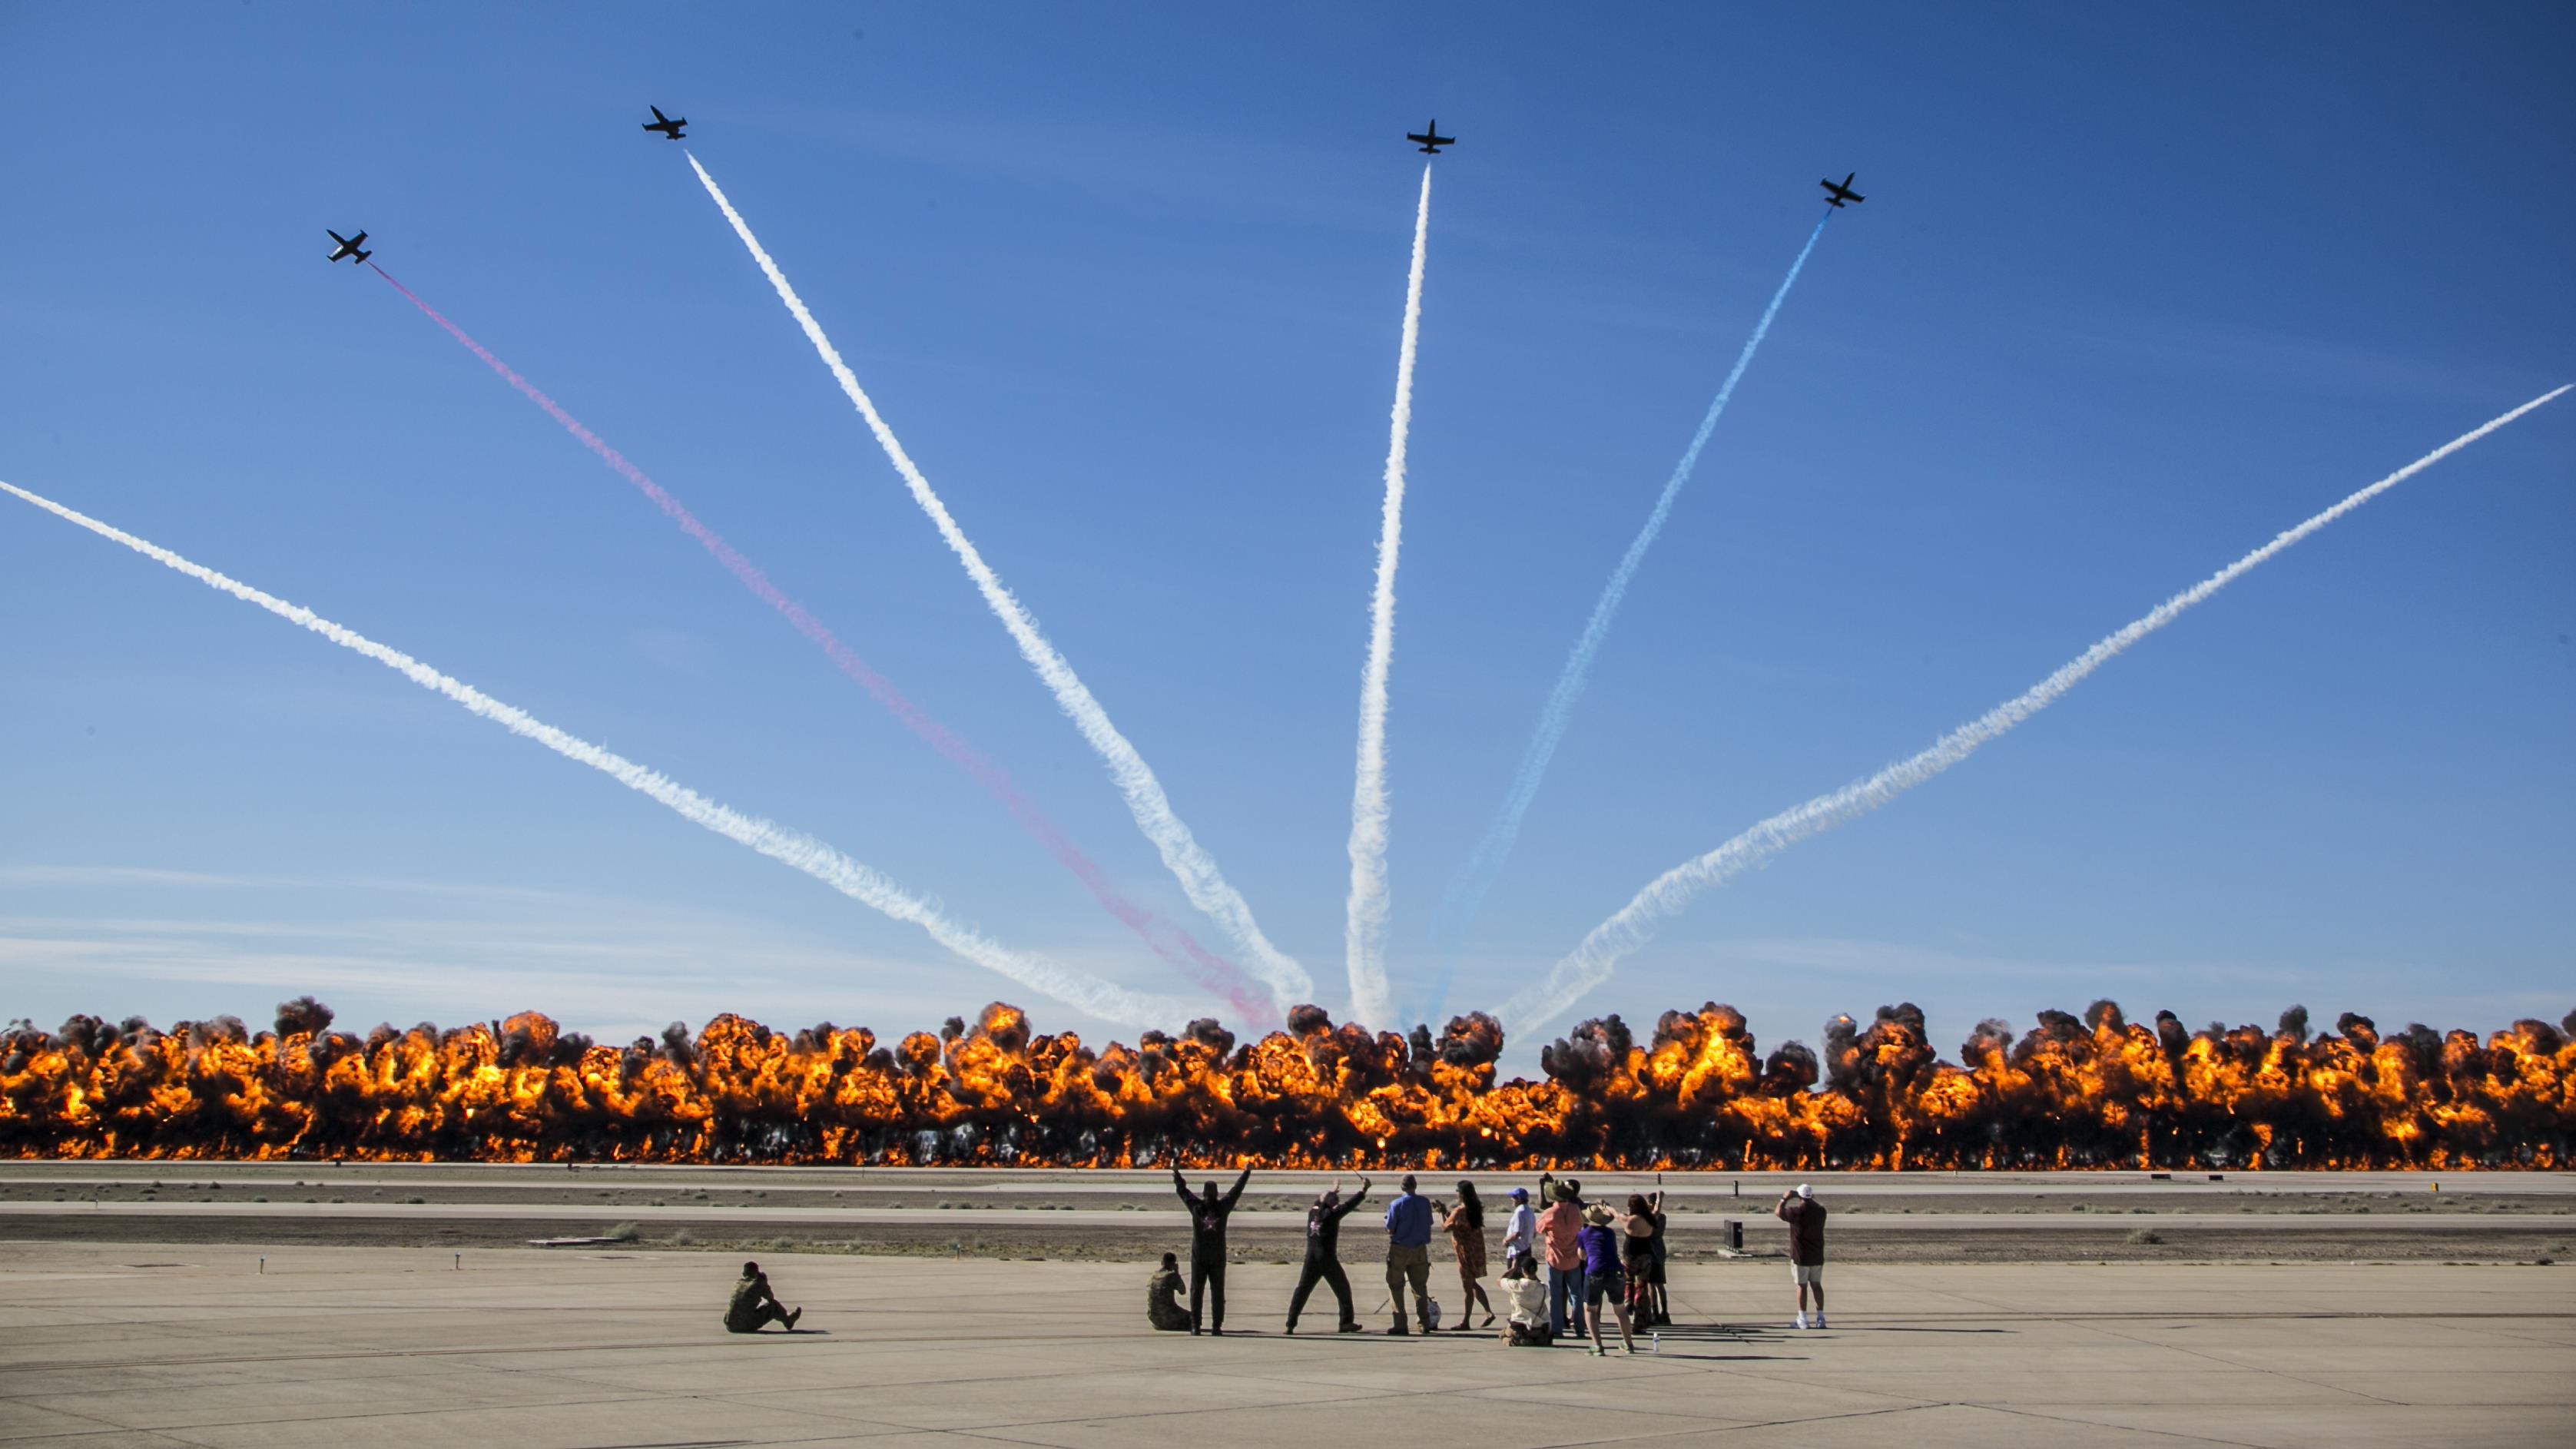 Watch The Worlds Largest Wall of Fire! 2017 Yuma Airshow at Marine